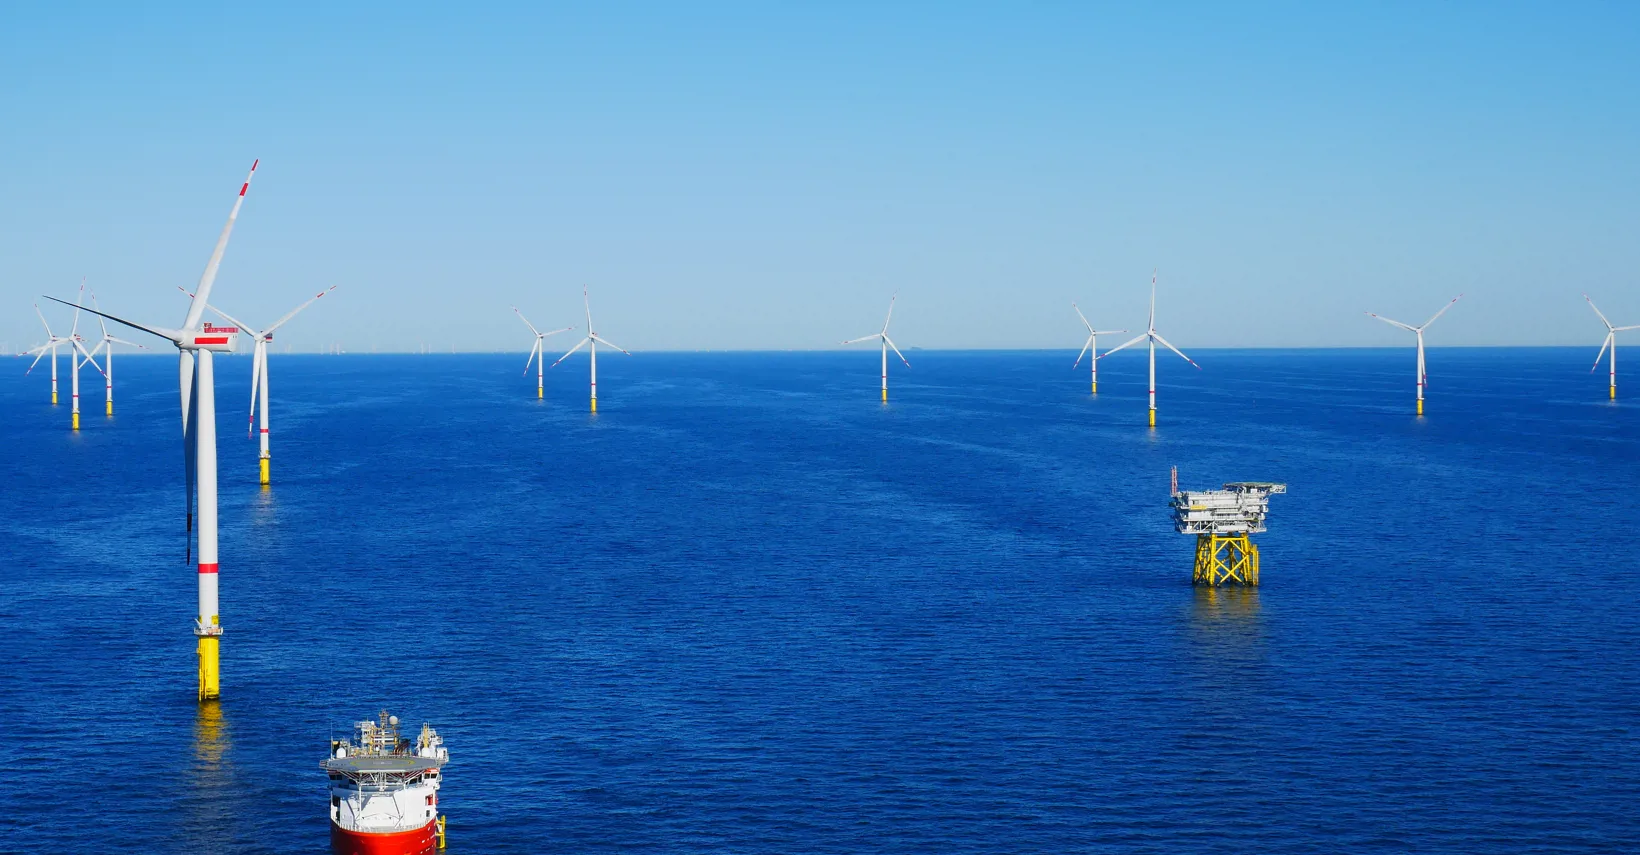 Clarksons Renewables Offshore Wind Farm and Vessels 